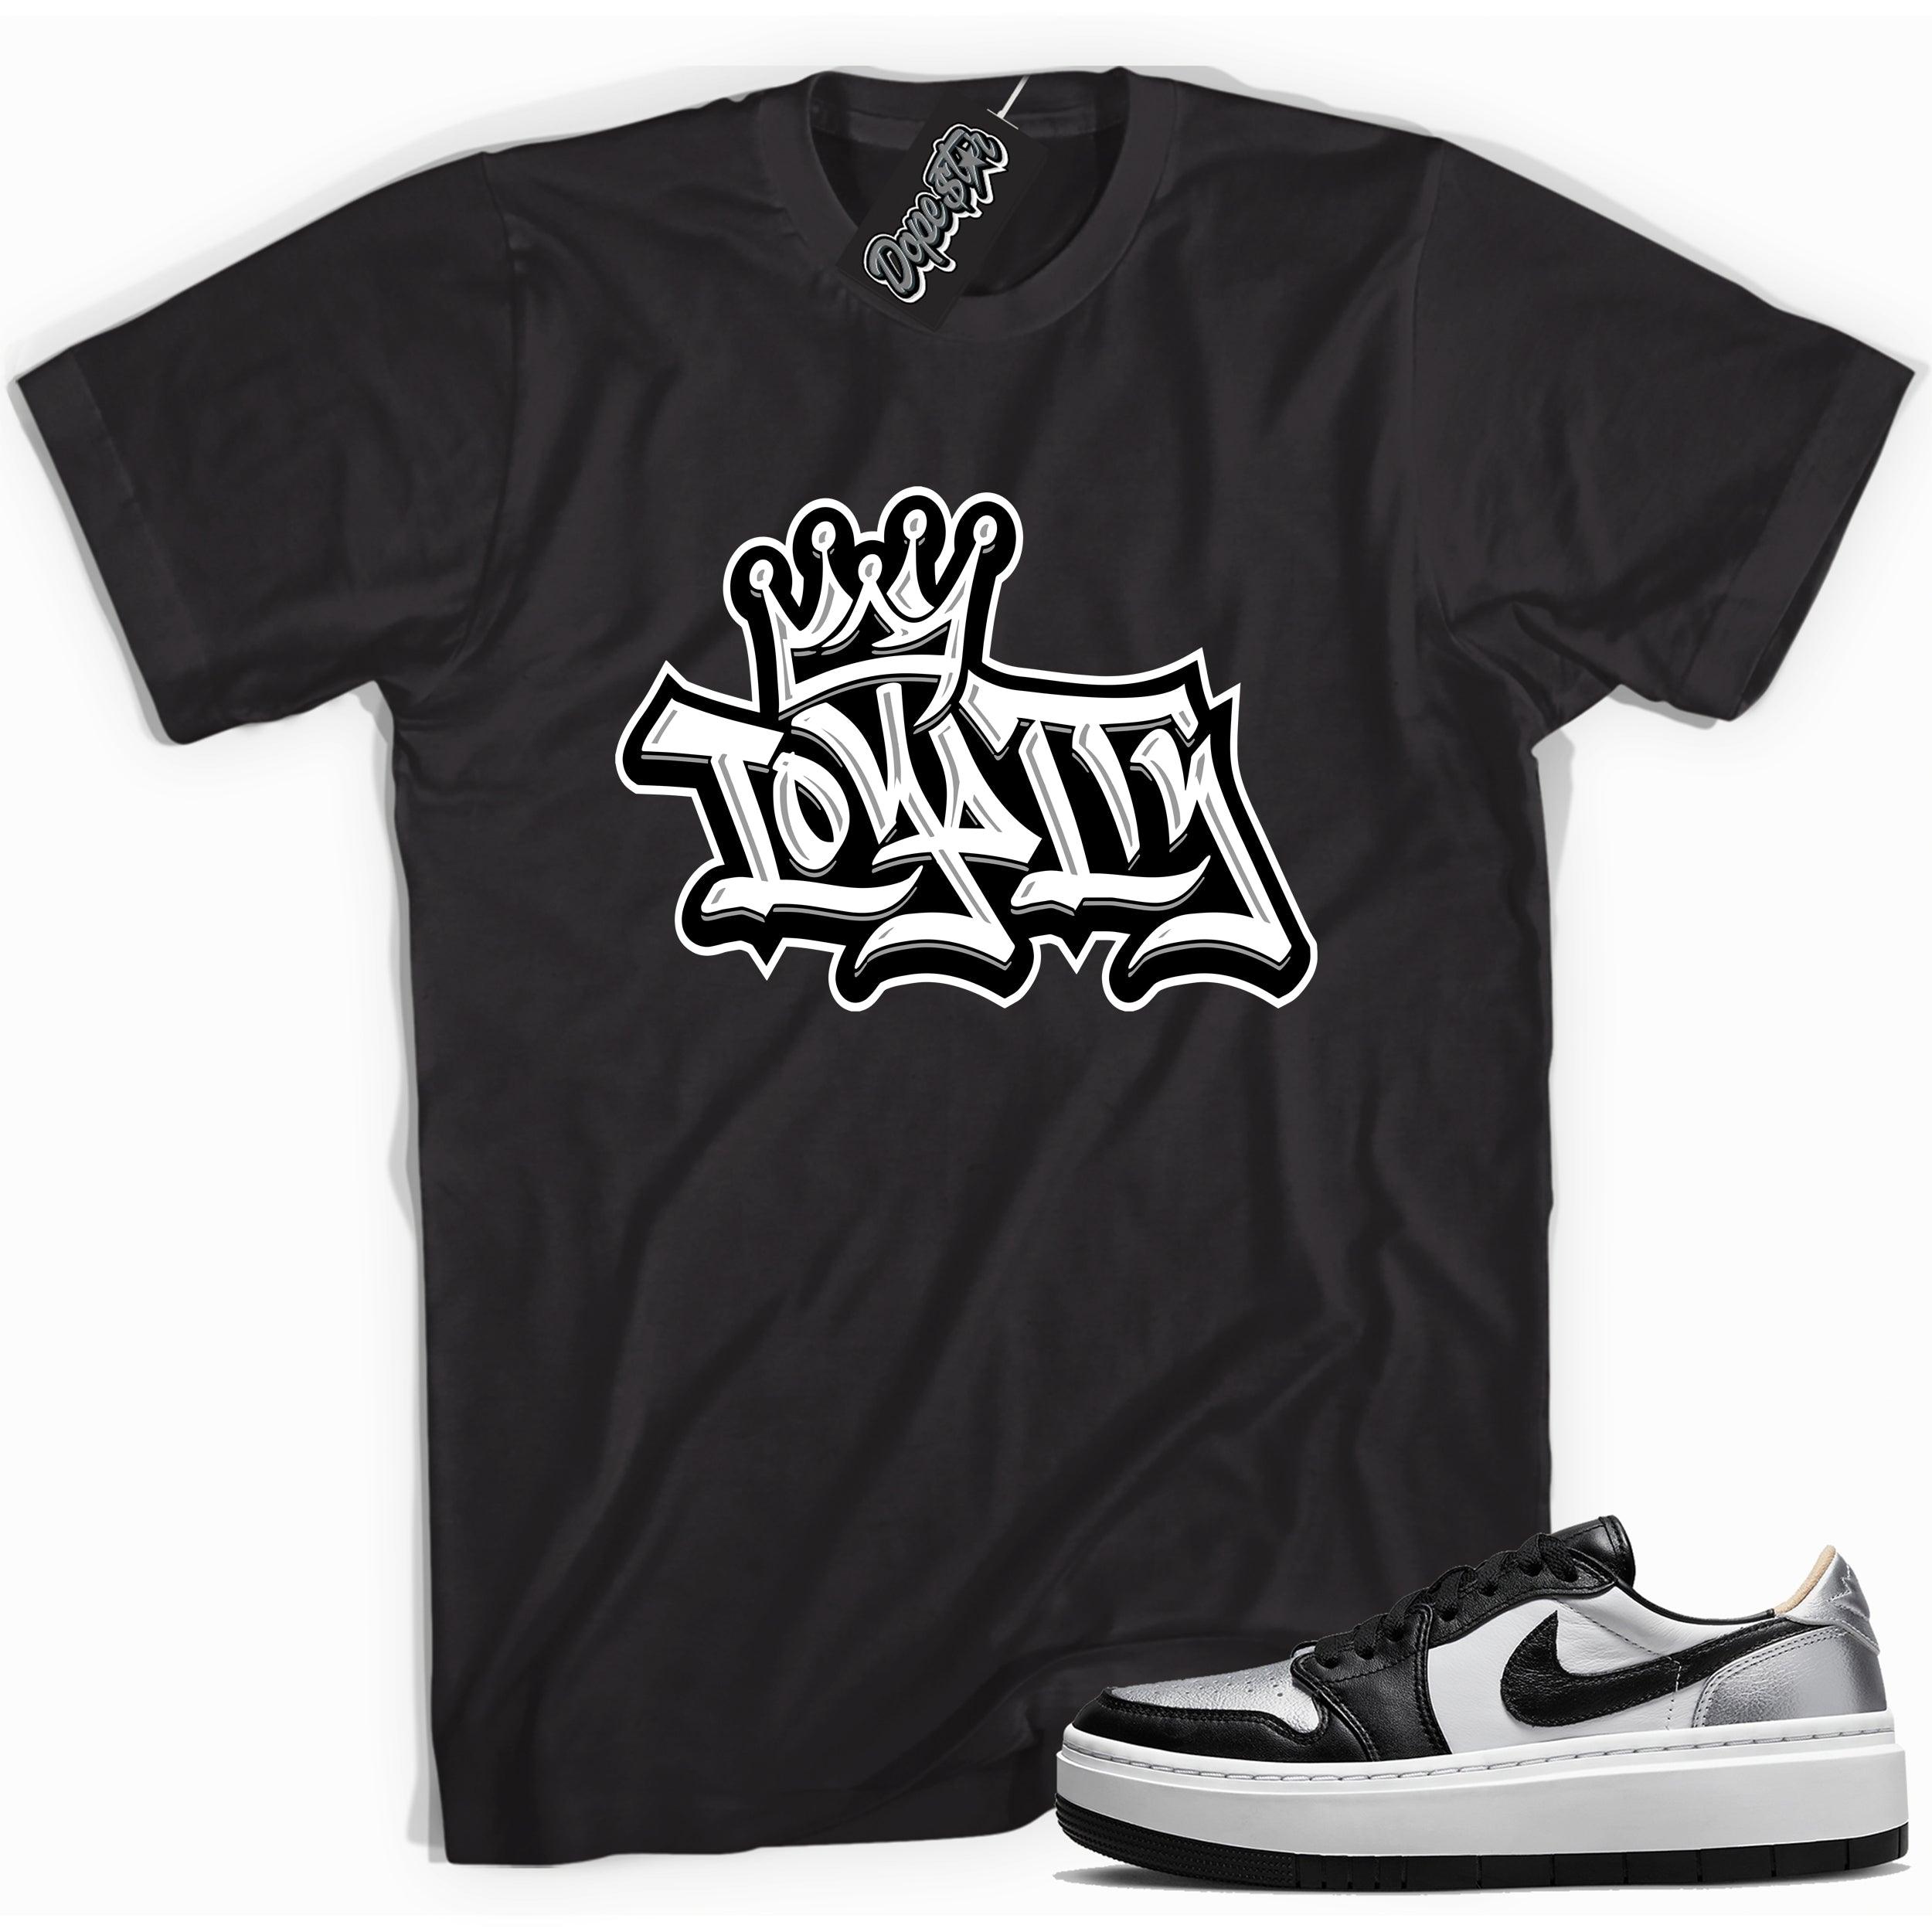 Cool black graphic tee with 'loyalty' print, that perfectly matches Air Jordan 1 Elevate Low SE Silver Toe sneakers.